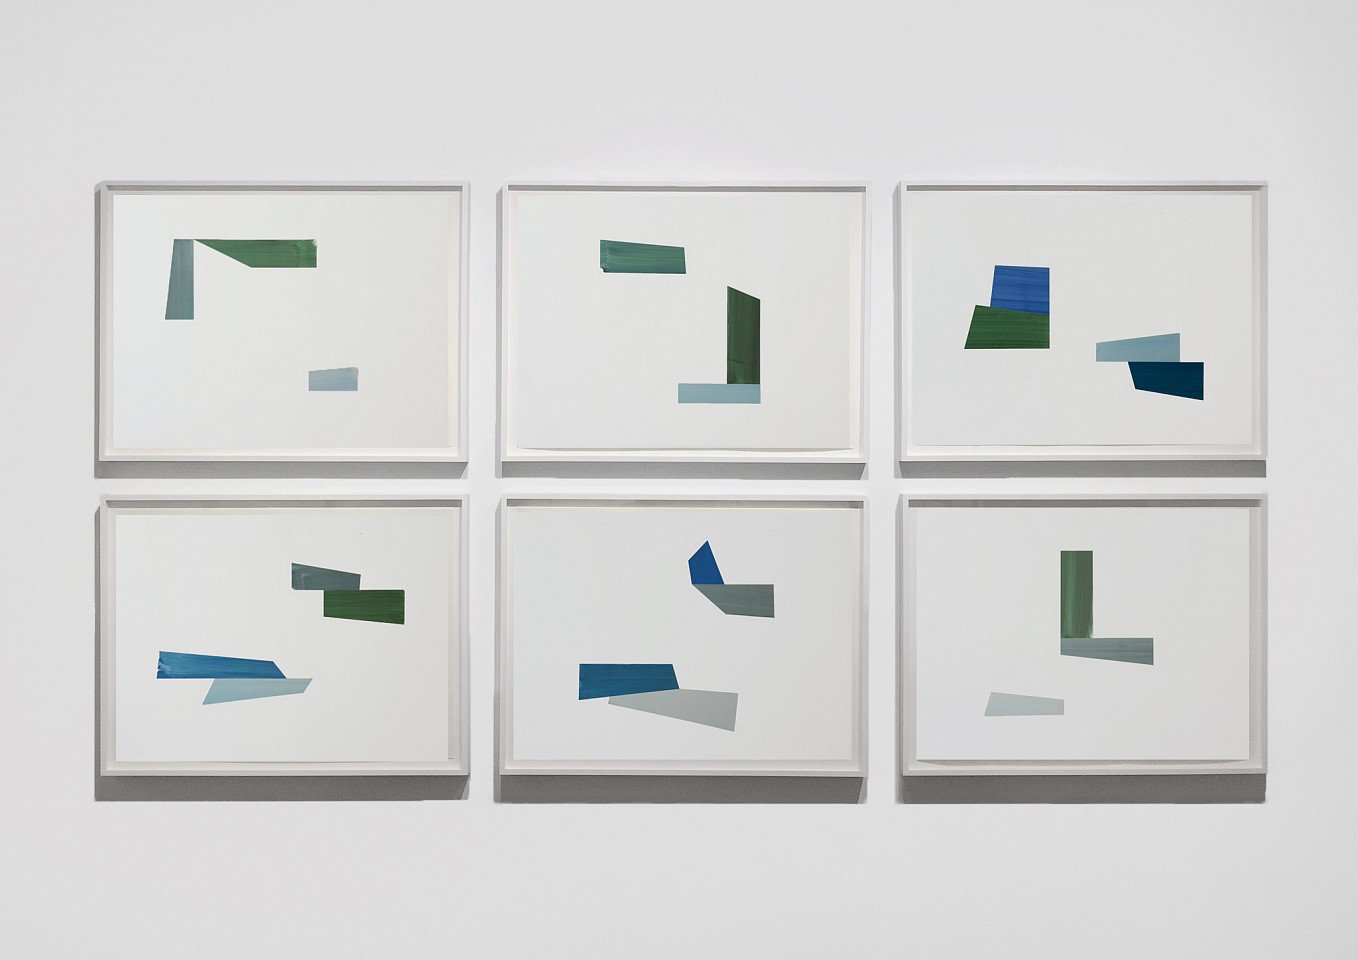 Agnes Barley (LA)
Untitled Collage (Grid Waves) Installation, 2015
BARL215
acrylic on cut paper, 22 x 30 inch paper, 25 x 33 inches framed Group size approximately 45 x 101 inches